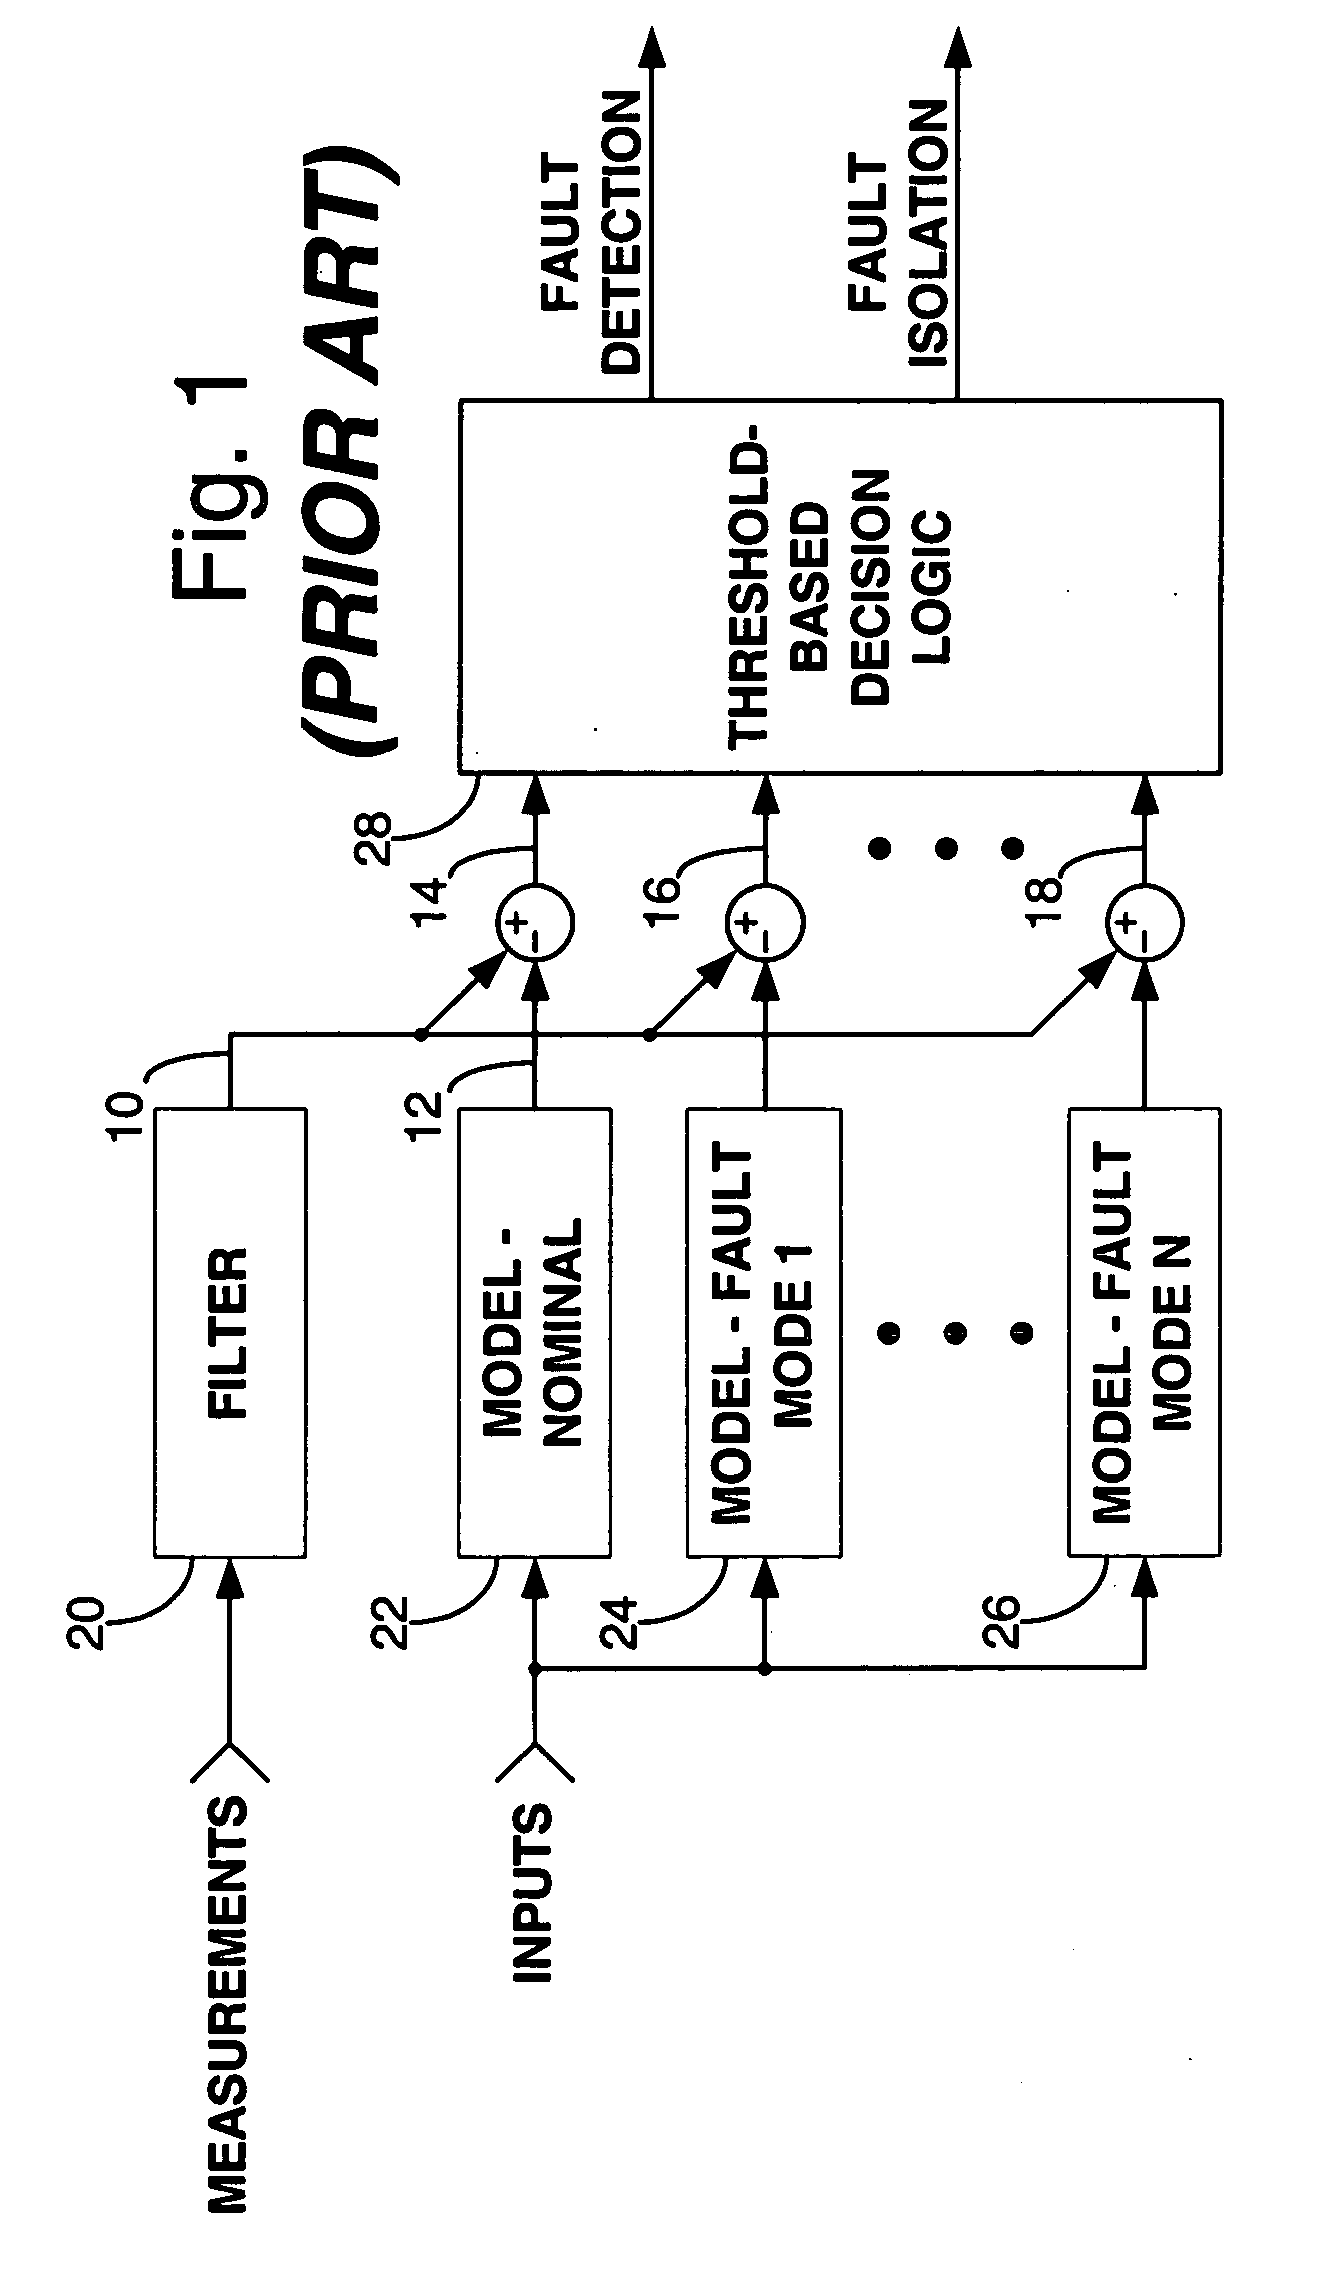 Model-based fault detection and isolation for intermittently active faults with application to motion-based thruster fault detection and isolation for spacecraft